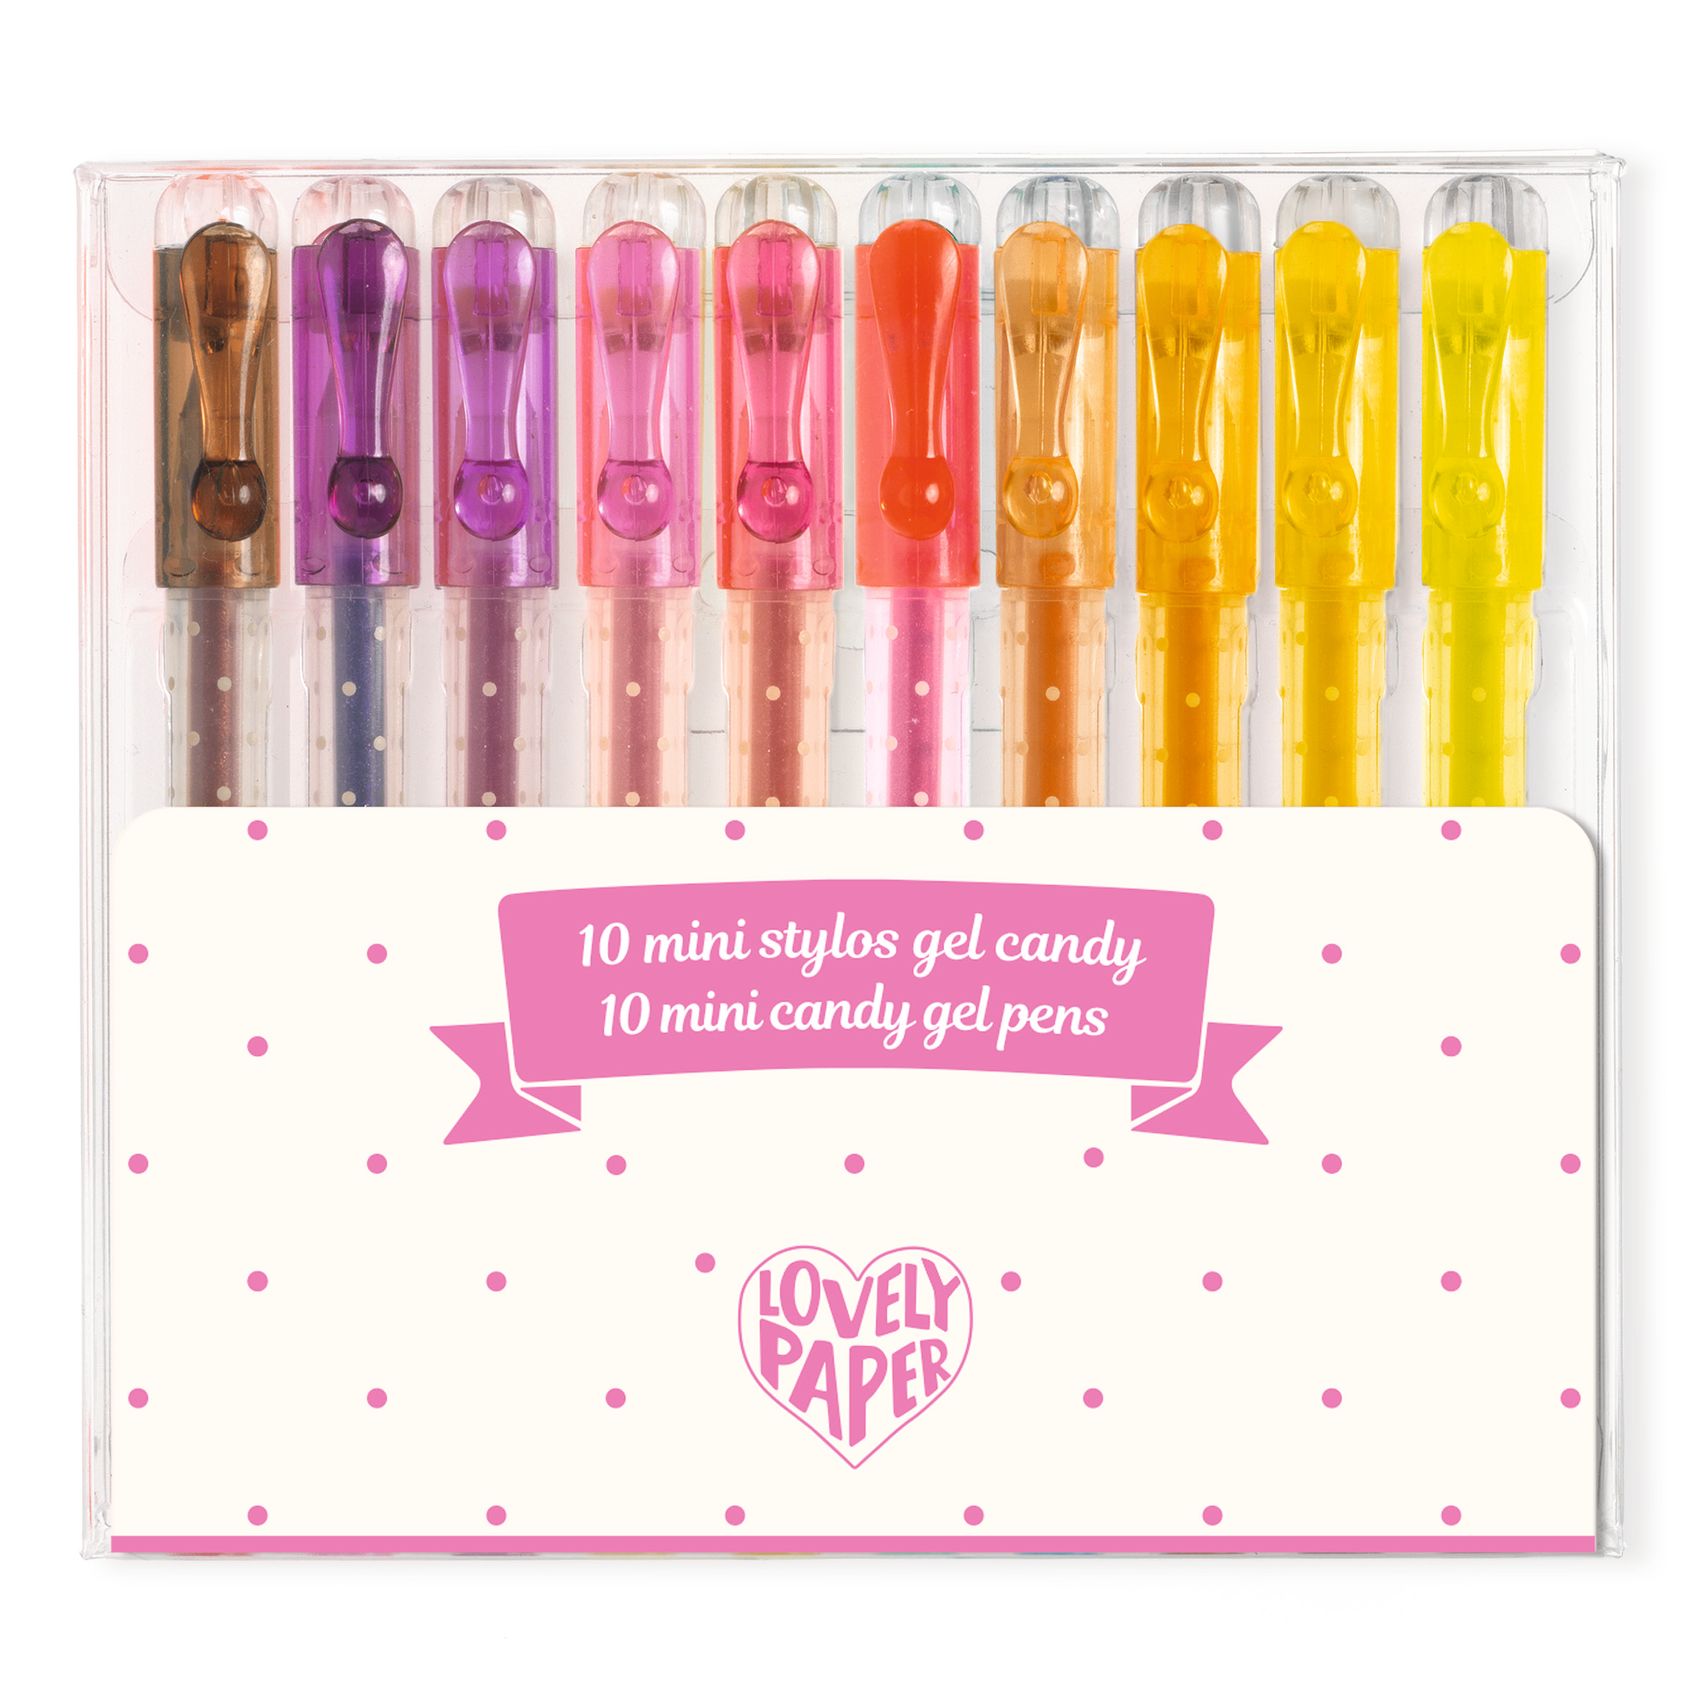 10 mini candy gel pens by lovely paper for Djeco